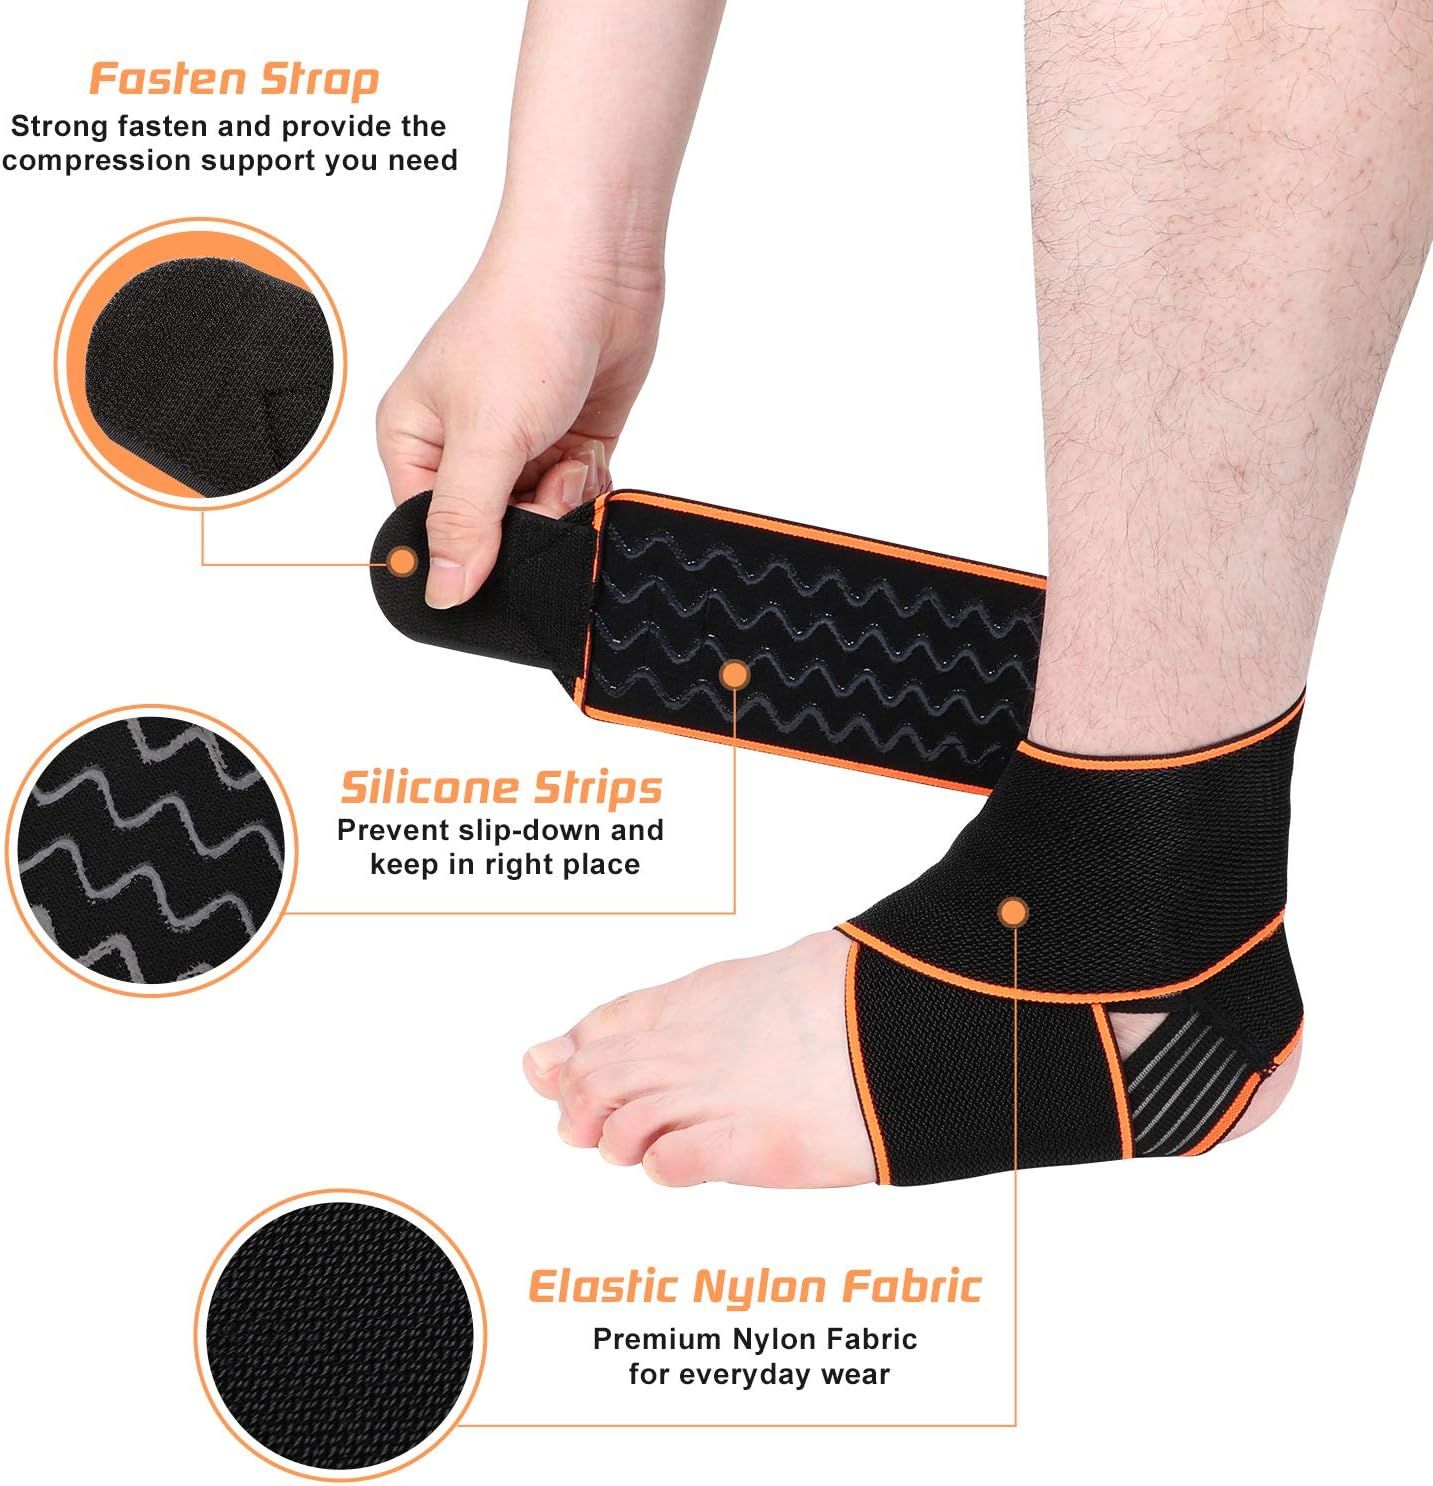 GARNO Ankle Brace Compression Sleeve with Adjustable Straps, Arch Support &  Foot Stabilizer, Elastic Wrap for Plantar Fasciitis, Achilles Tendonitis